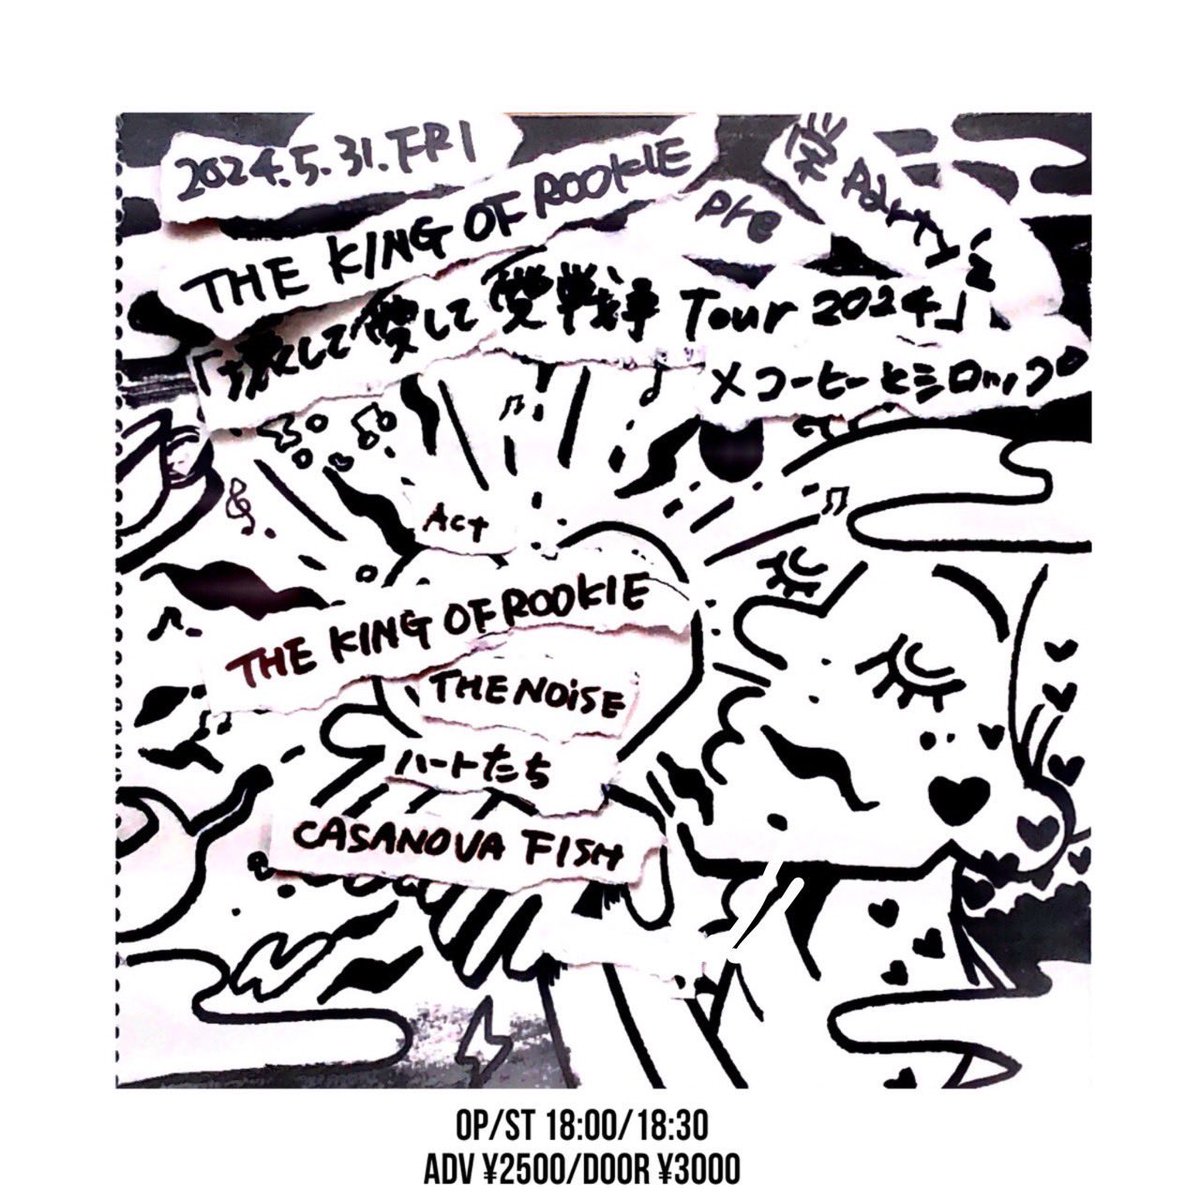 【⚡️月末のTHE NOiSE !!⚡️⠀】 2024.5.31 (金) THE KING OF ROOKIE pre. 「壊して包んで愛戦争 tour 2024」 ×コーヒーとシロップ 📍栄Party'z w/ THE KIKG OF ROOKIE CASANOVA FISH ハートたち OP/ST 18:00/18:30 ADV/DOOR 2500/3000 🎫チケット thenoise.ryzm.jp/contact ※取り置きも開始！！